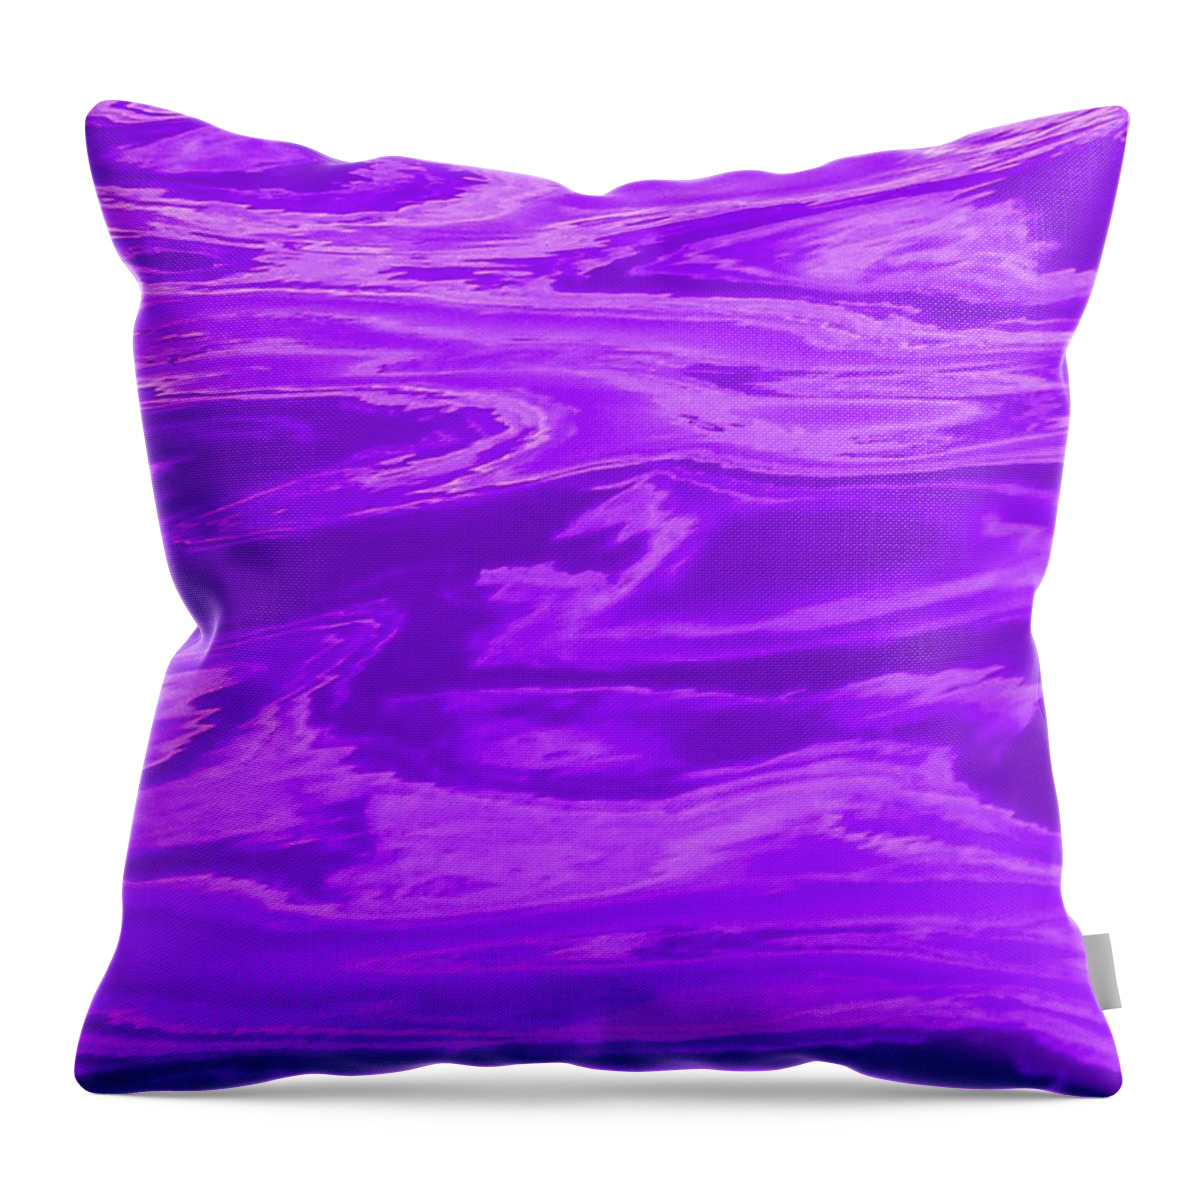 Multi Panel Throw Pillow featuring the photograph Colored Wave Purple Panel One by Stephen Jorgensen